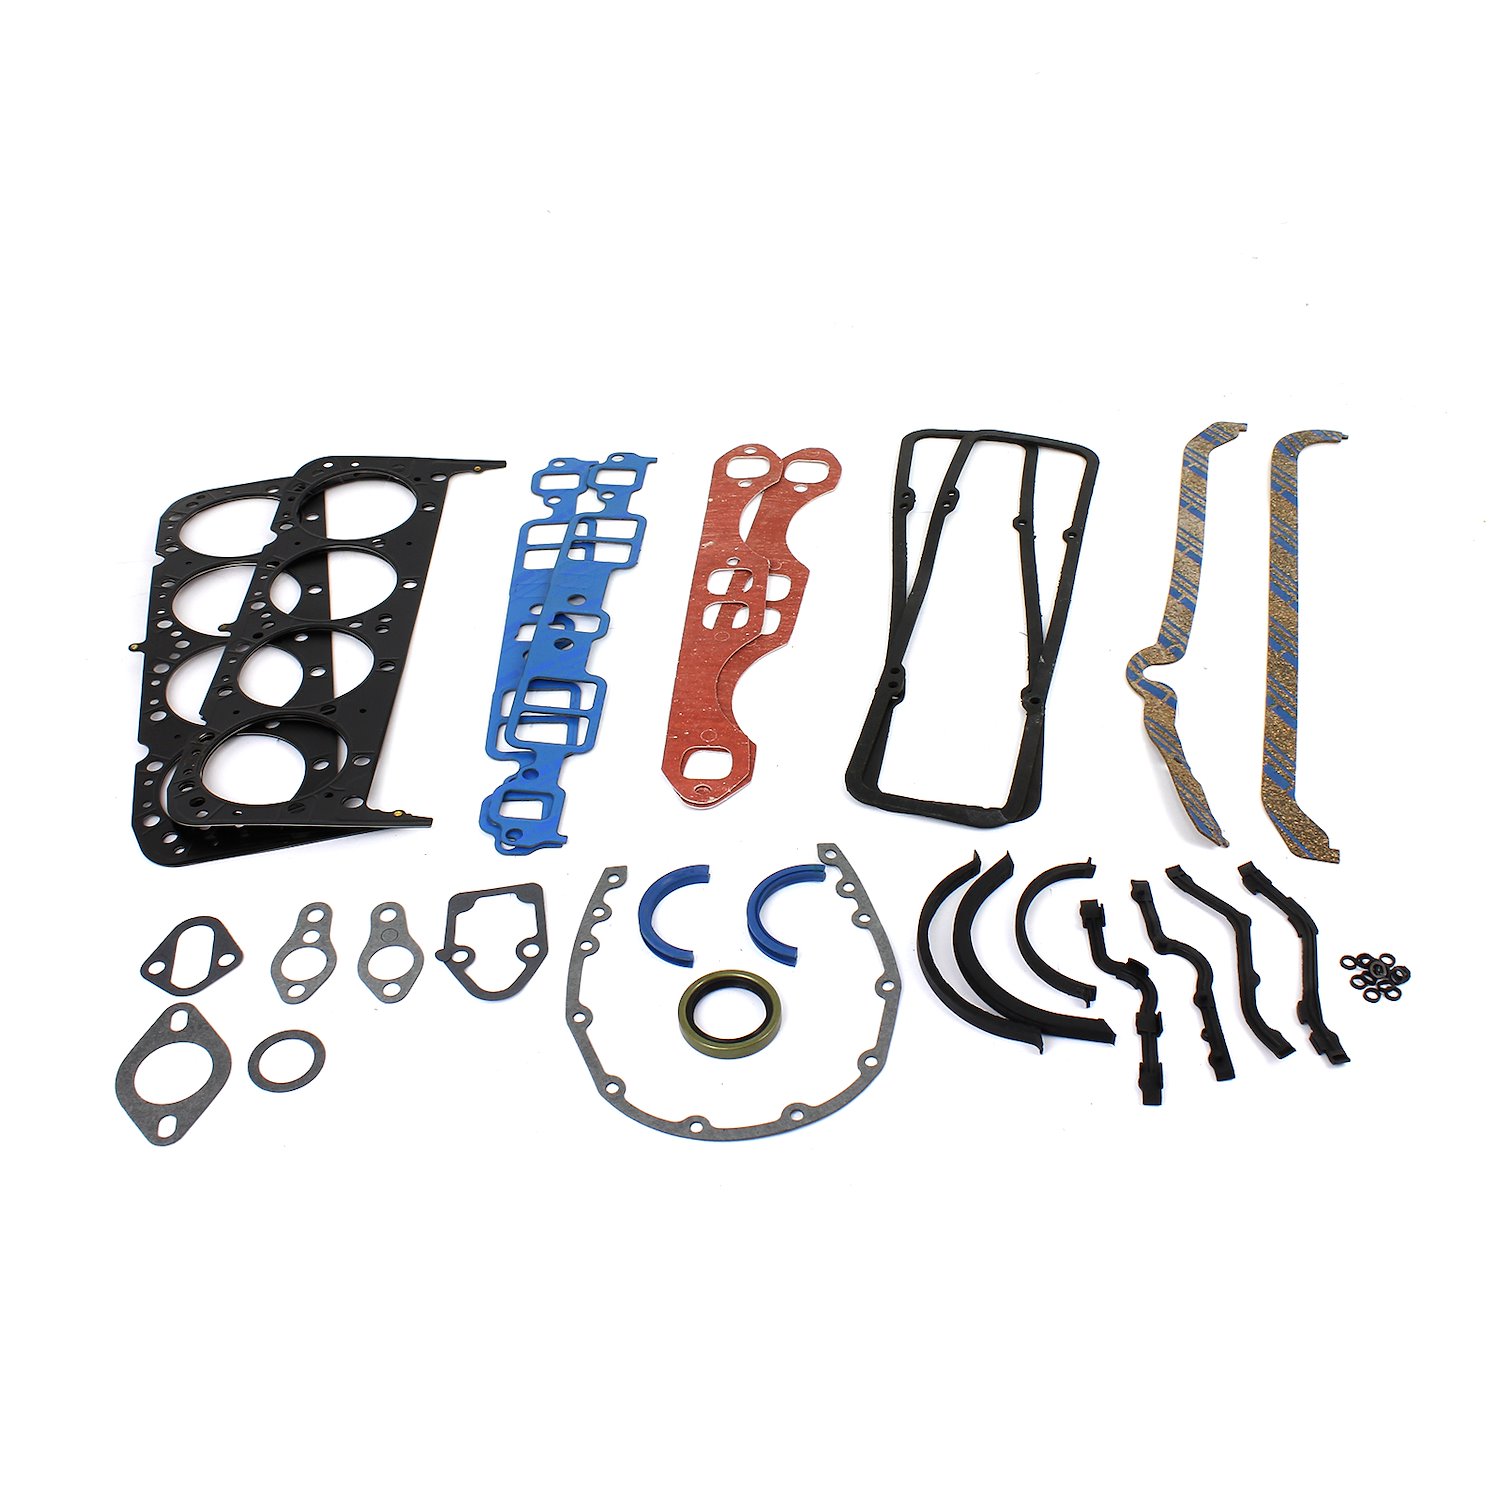 Full Engine Gasket Set for 1955-1979 Small Block